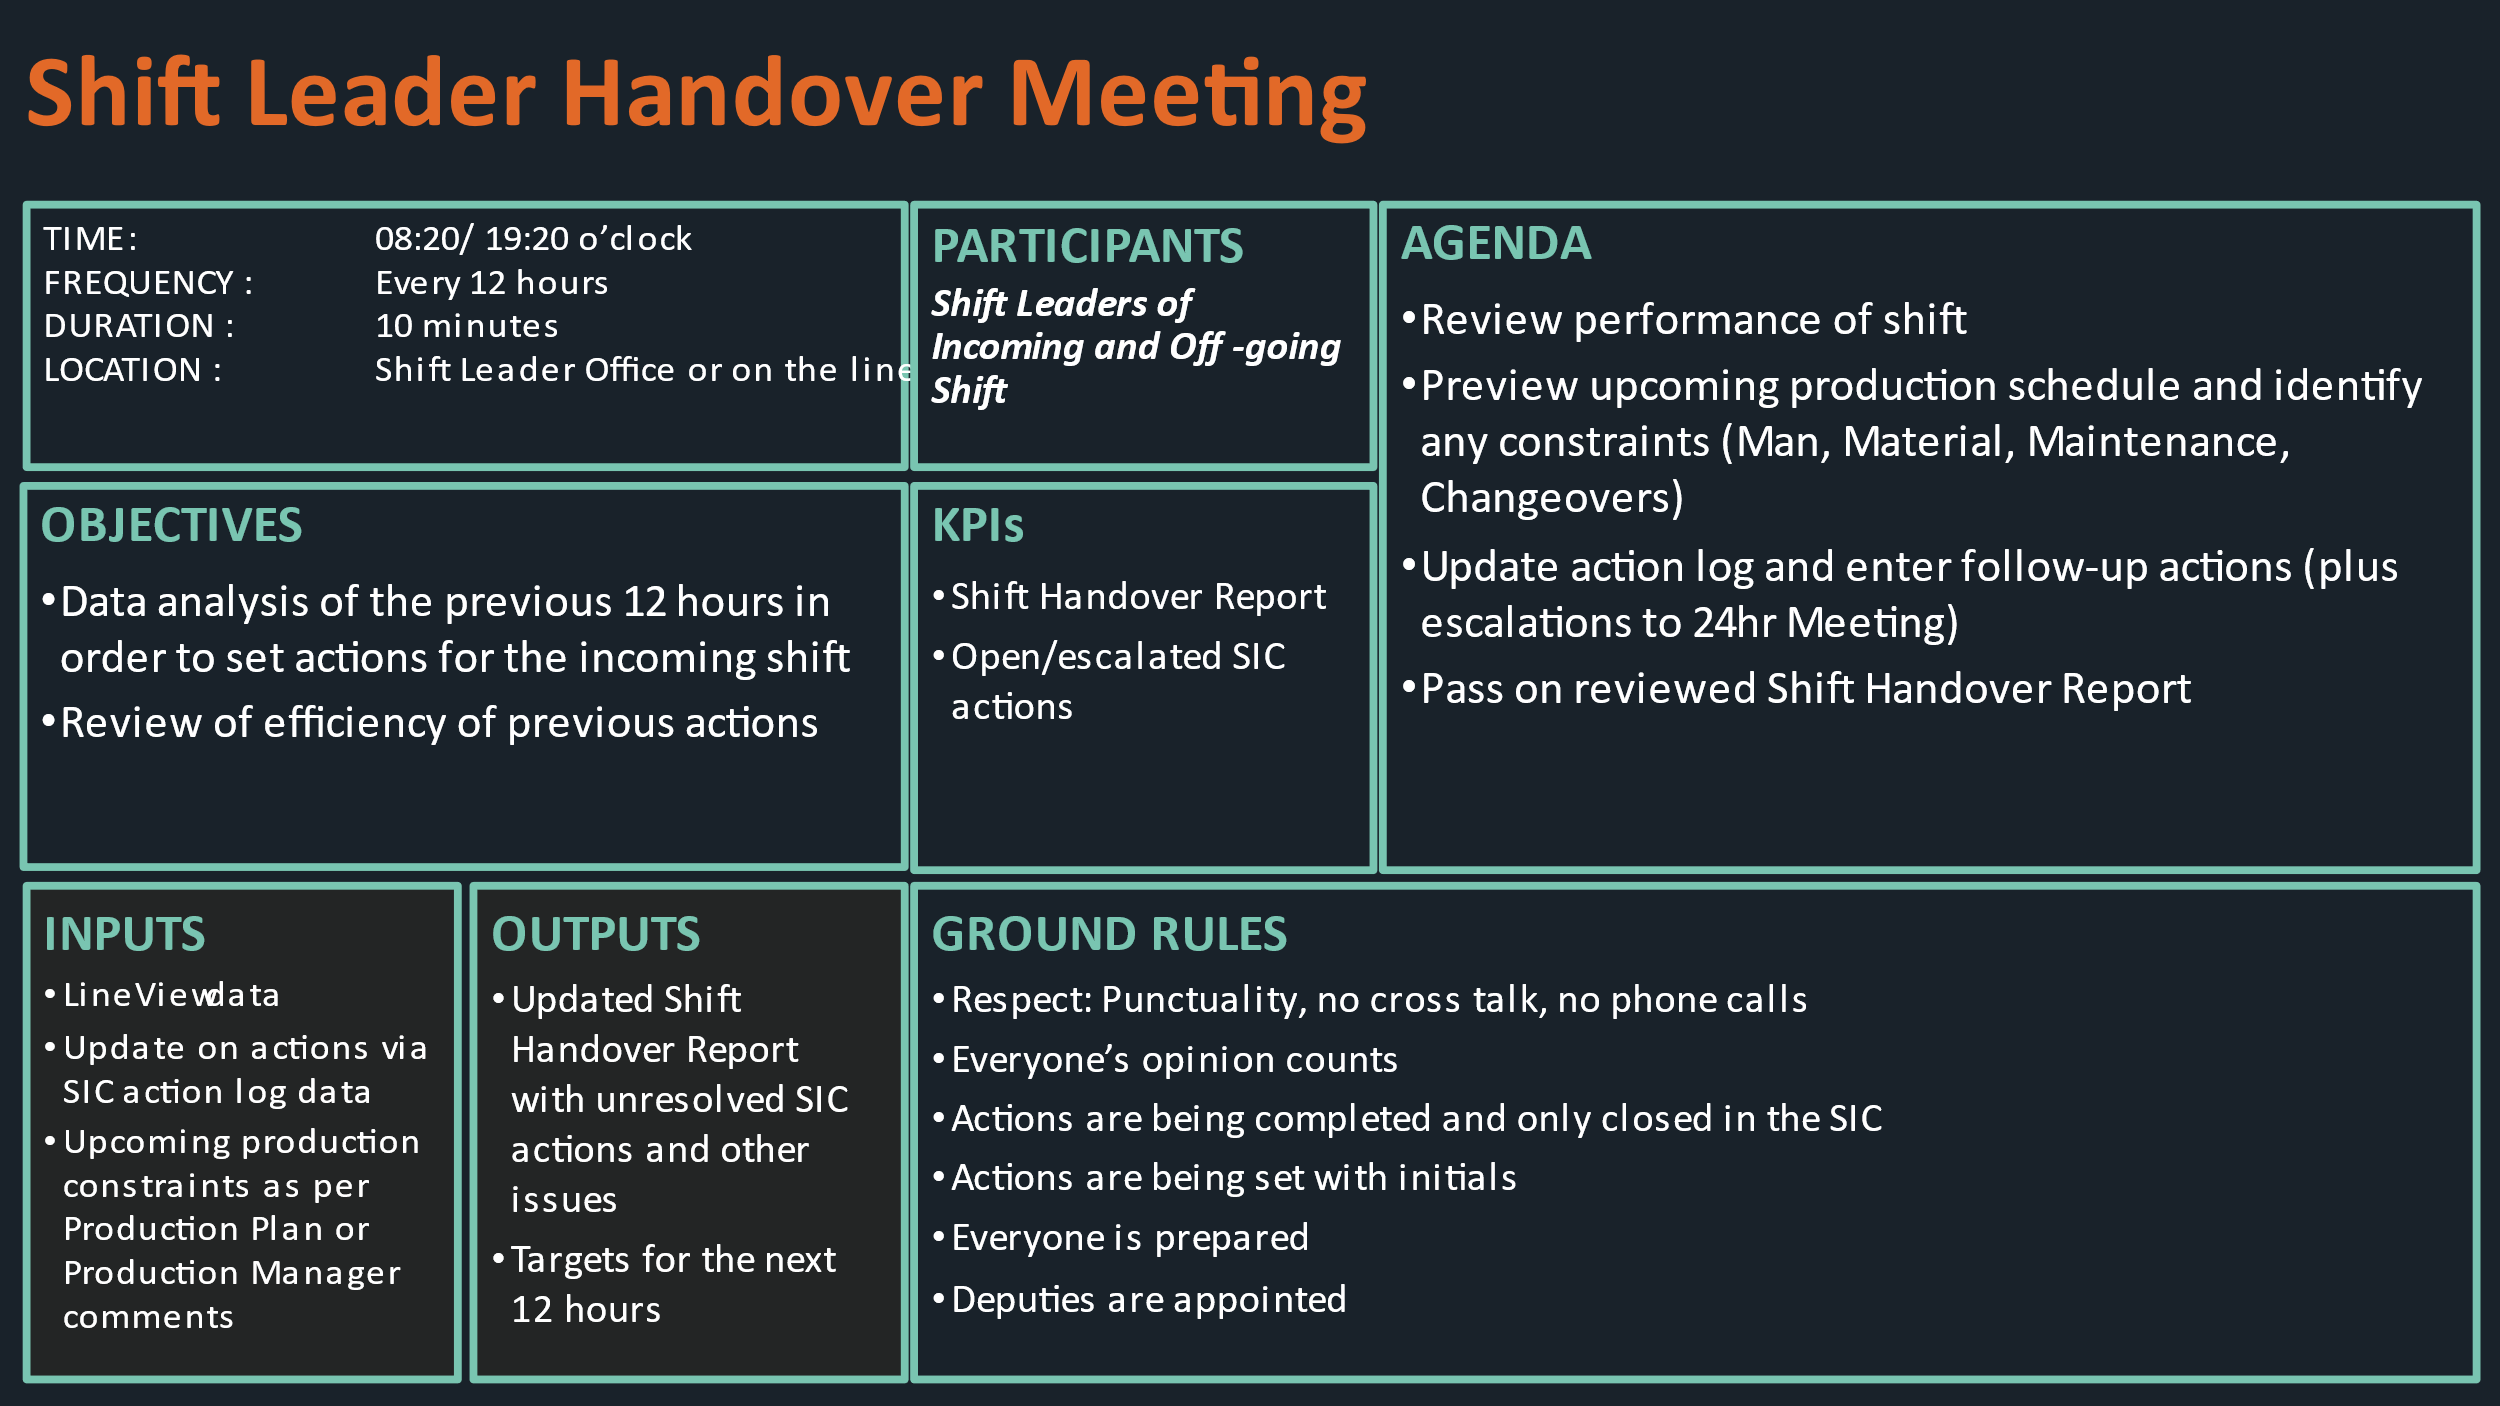 How to use shift handover policies & checklists for better OEE results